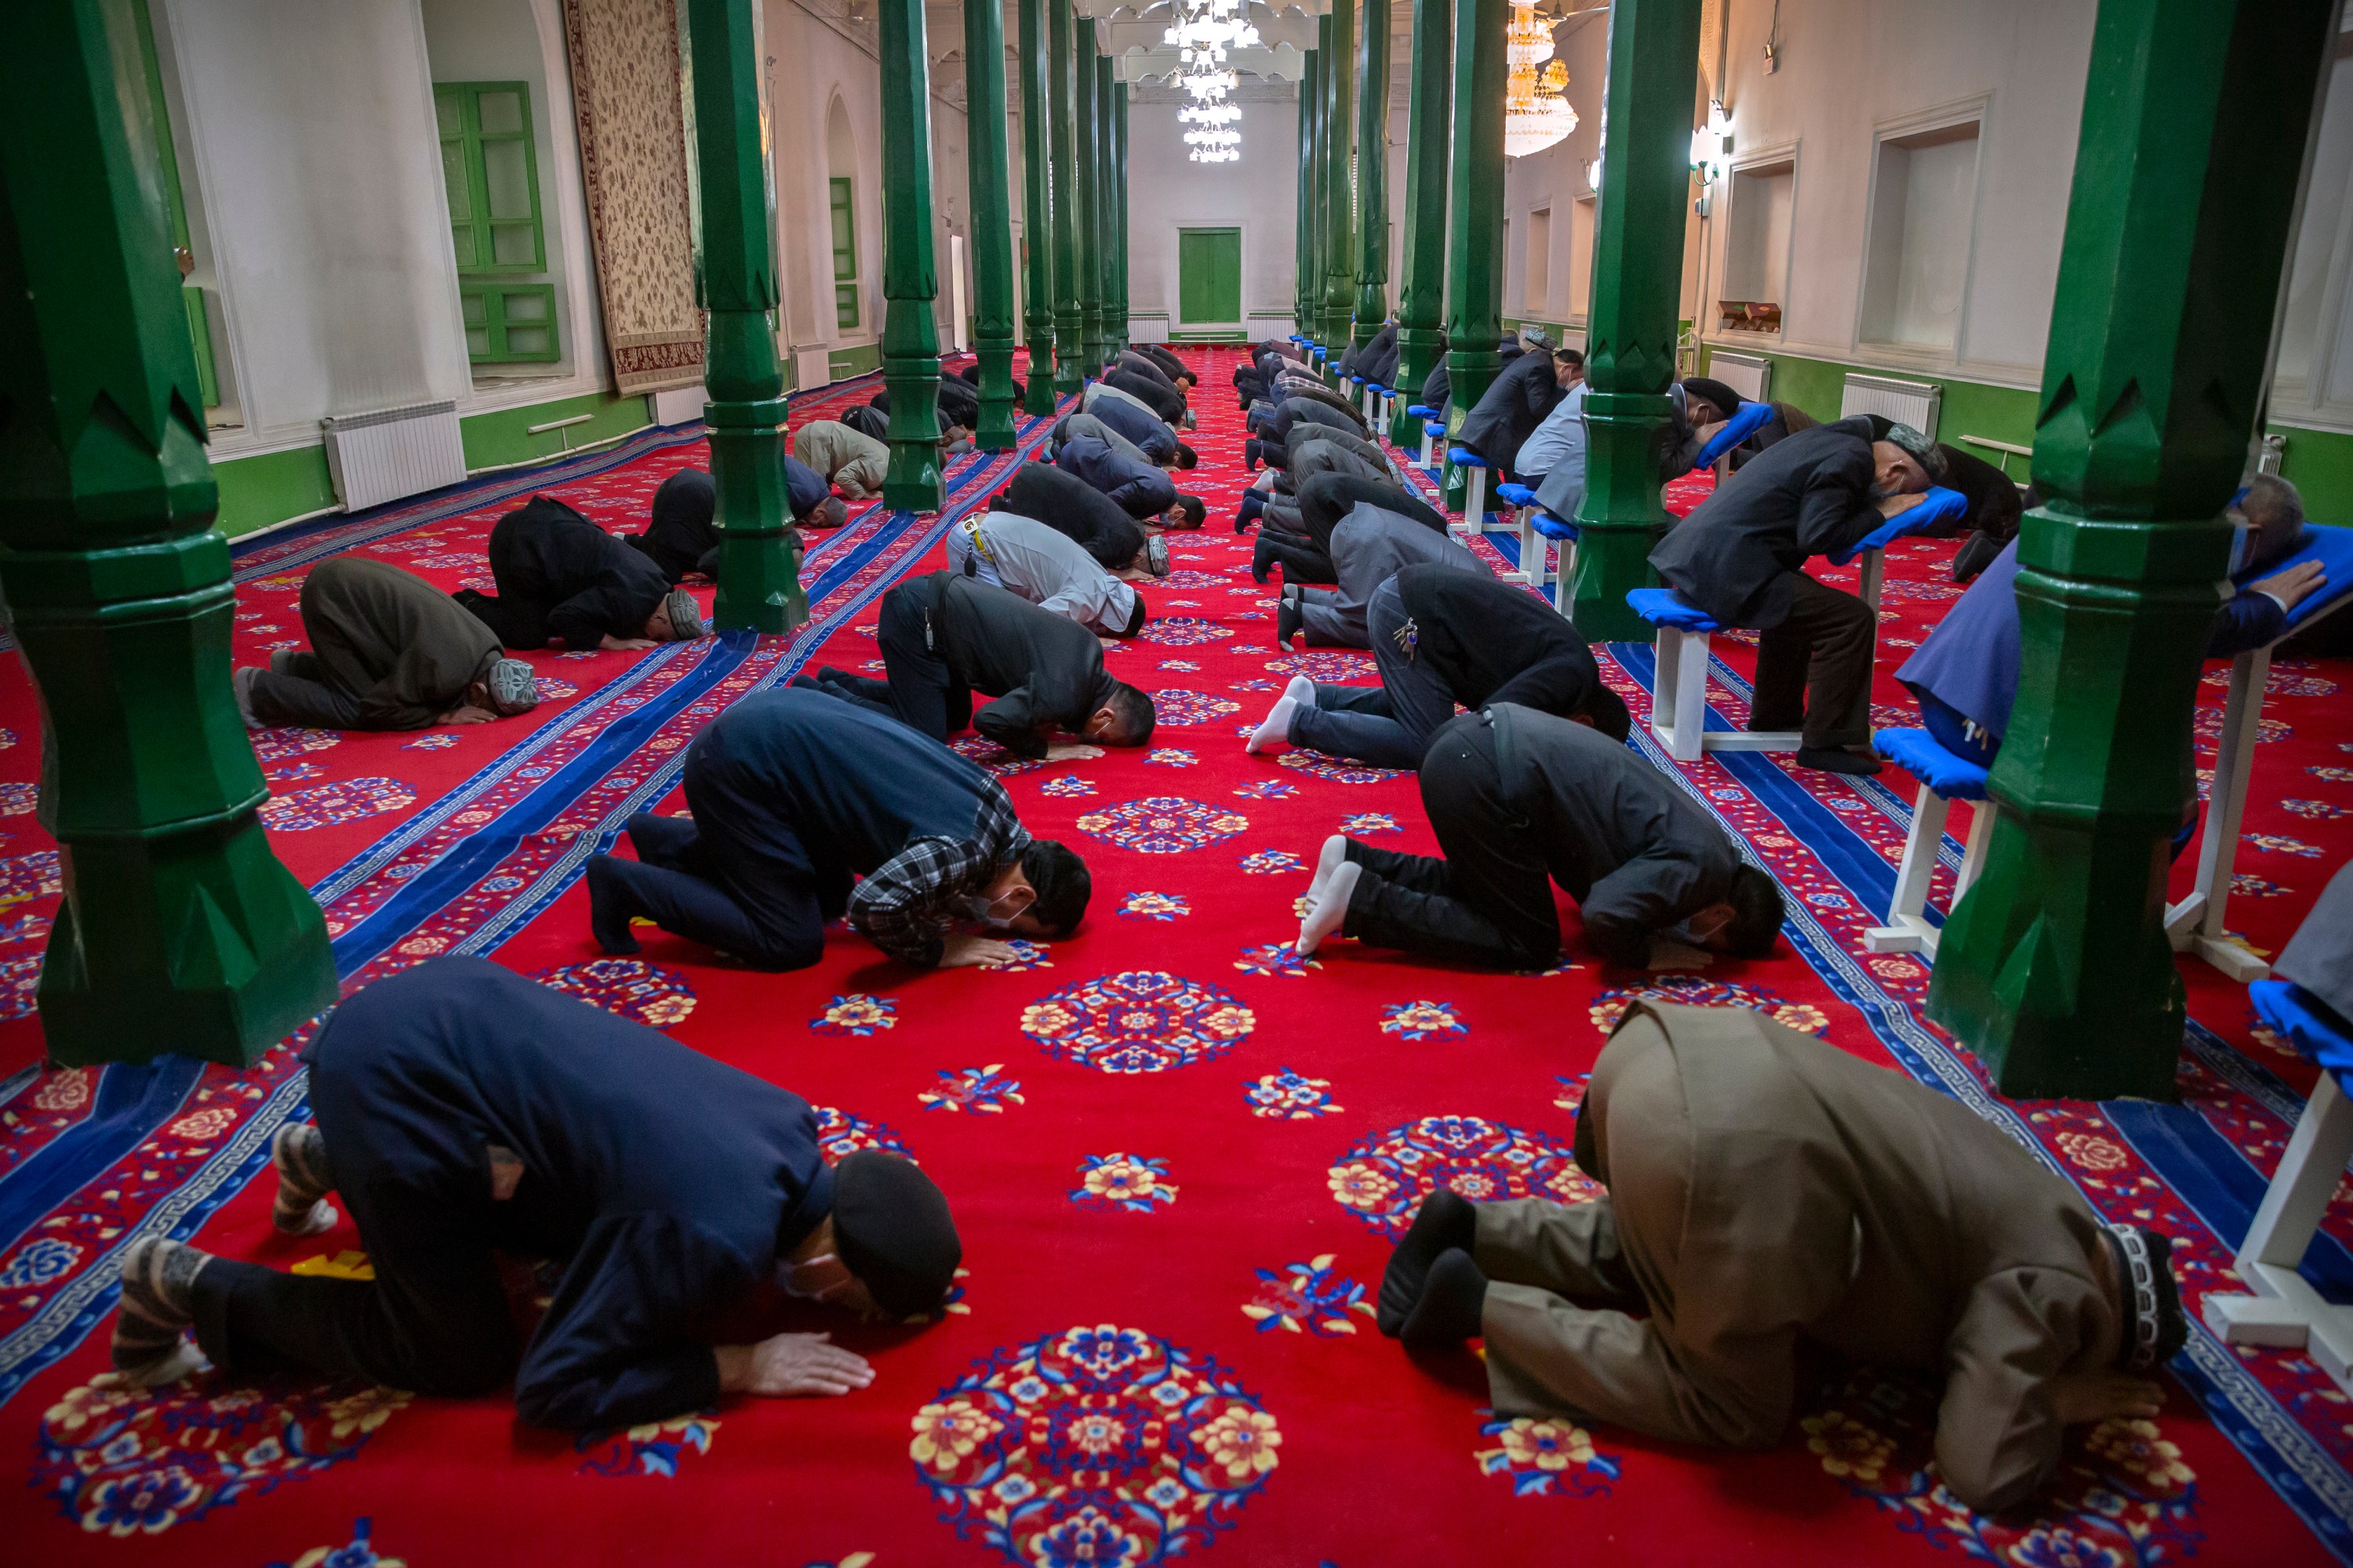 Uyghurs and other members of the faithful pray during services at the Id Kah Mosque in Kashgar in western China's Xinjiang Uyghur Autonomous Region, as seen during a government organized visit for foreign journalists on April 19, 2021. Under the weight of official policies, the future of Islam appears precarious in Xinjiang, a remote region facing Central Asia in China's northwest corner. Outside observers say scores of mosques have been demolished, which Beijing denies, and locals say the number of worshippers is on the decline.